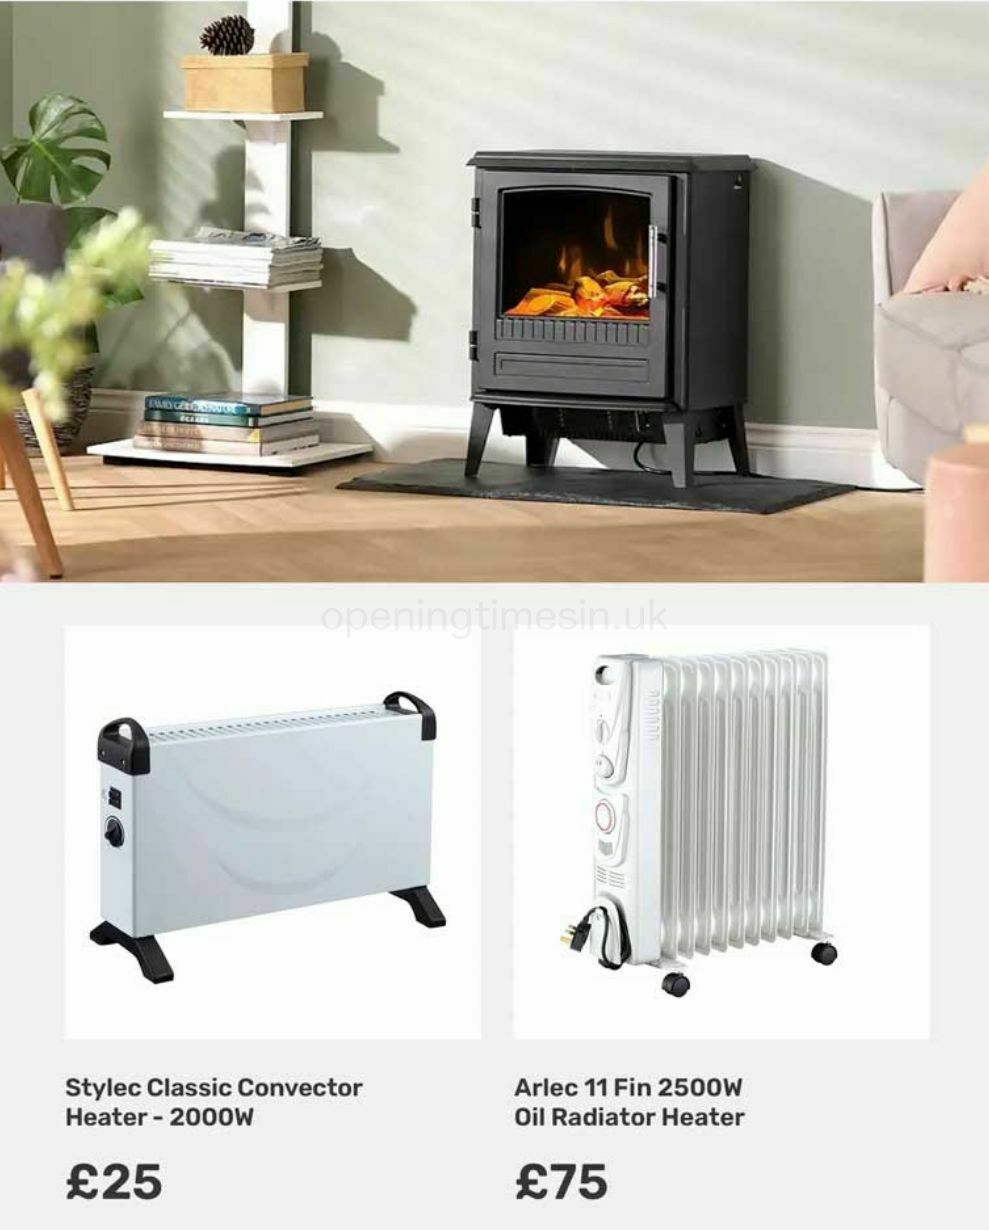 Homebase Offers from 16 October